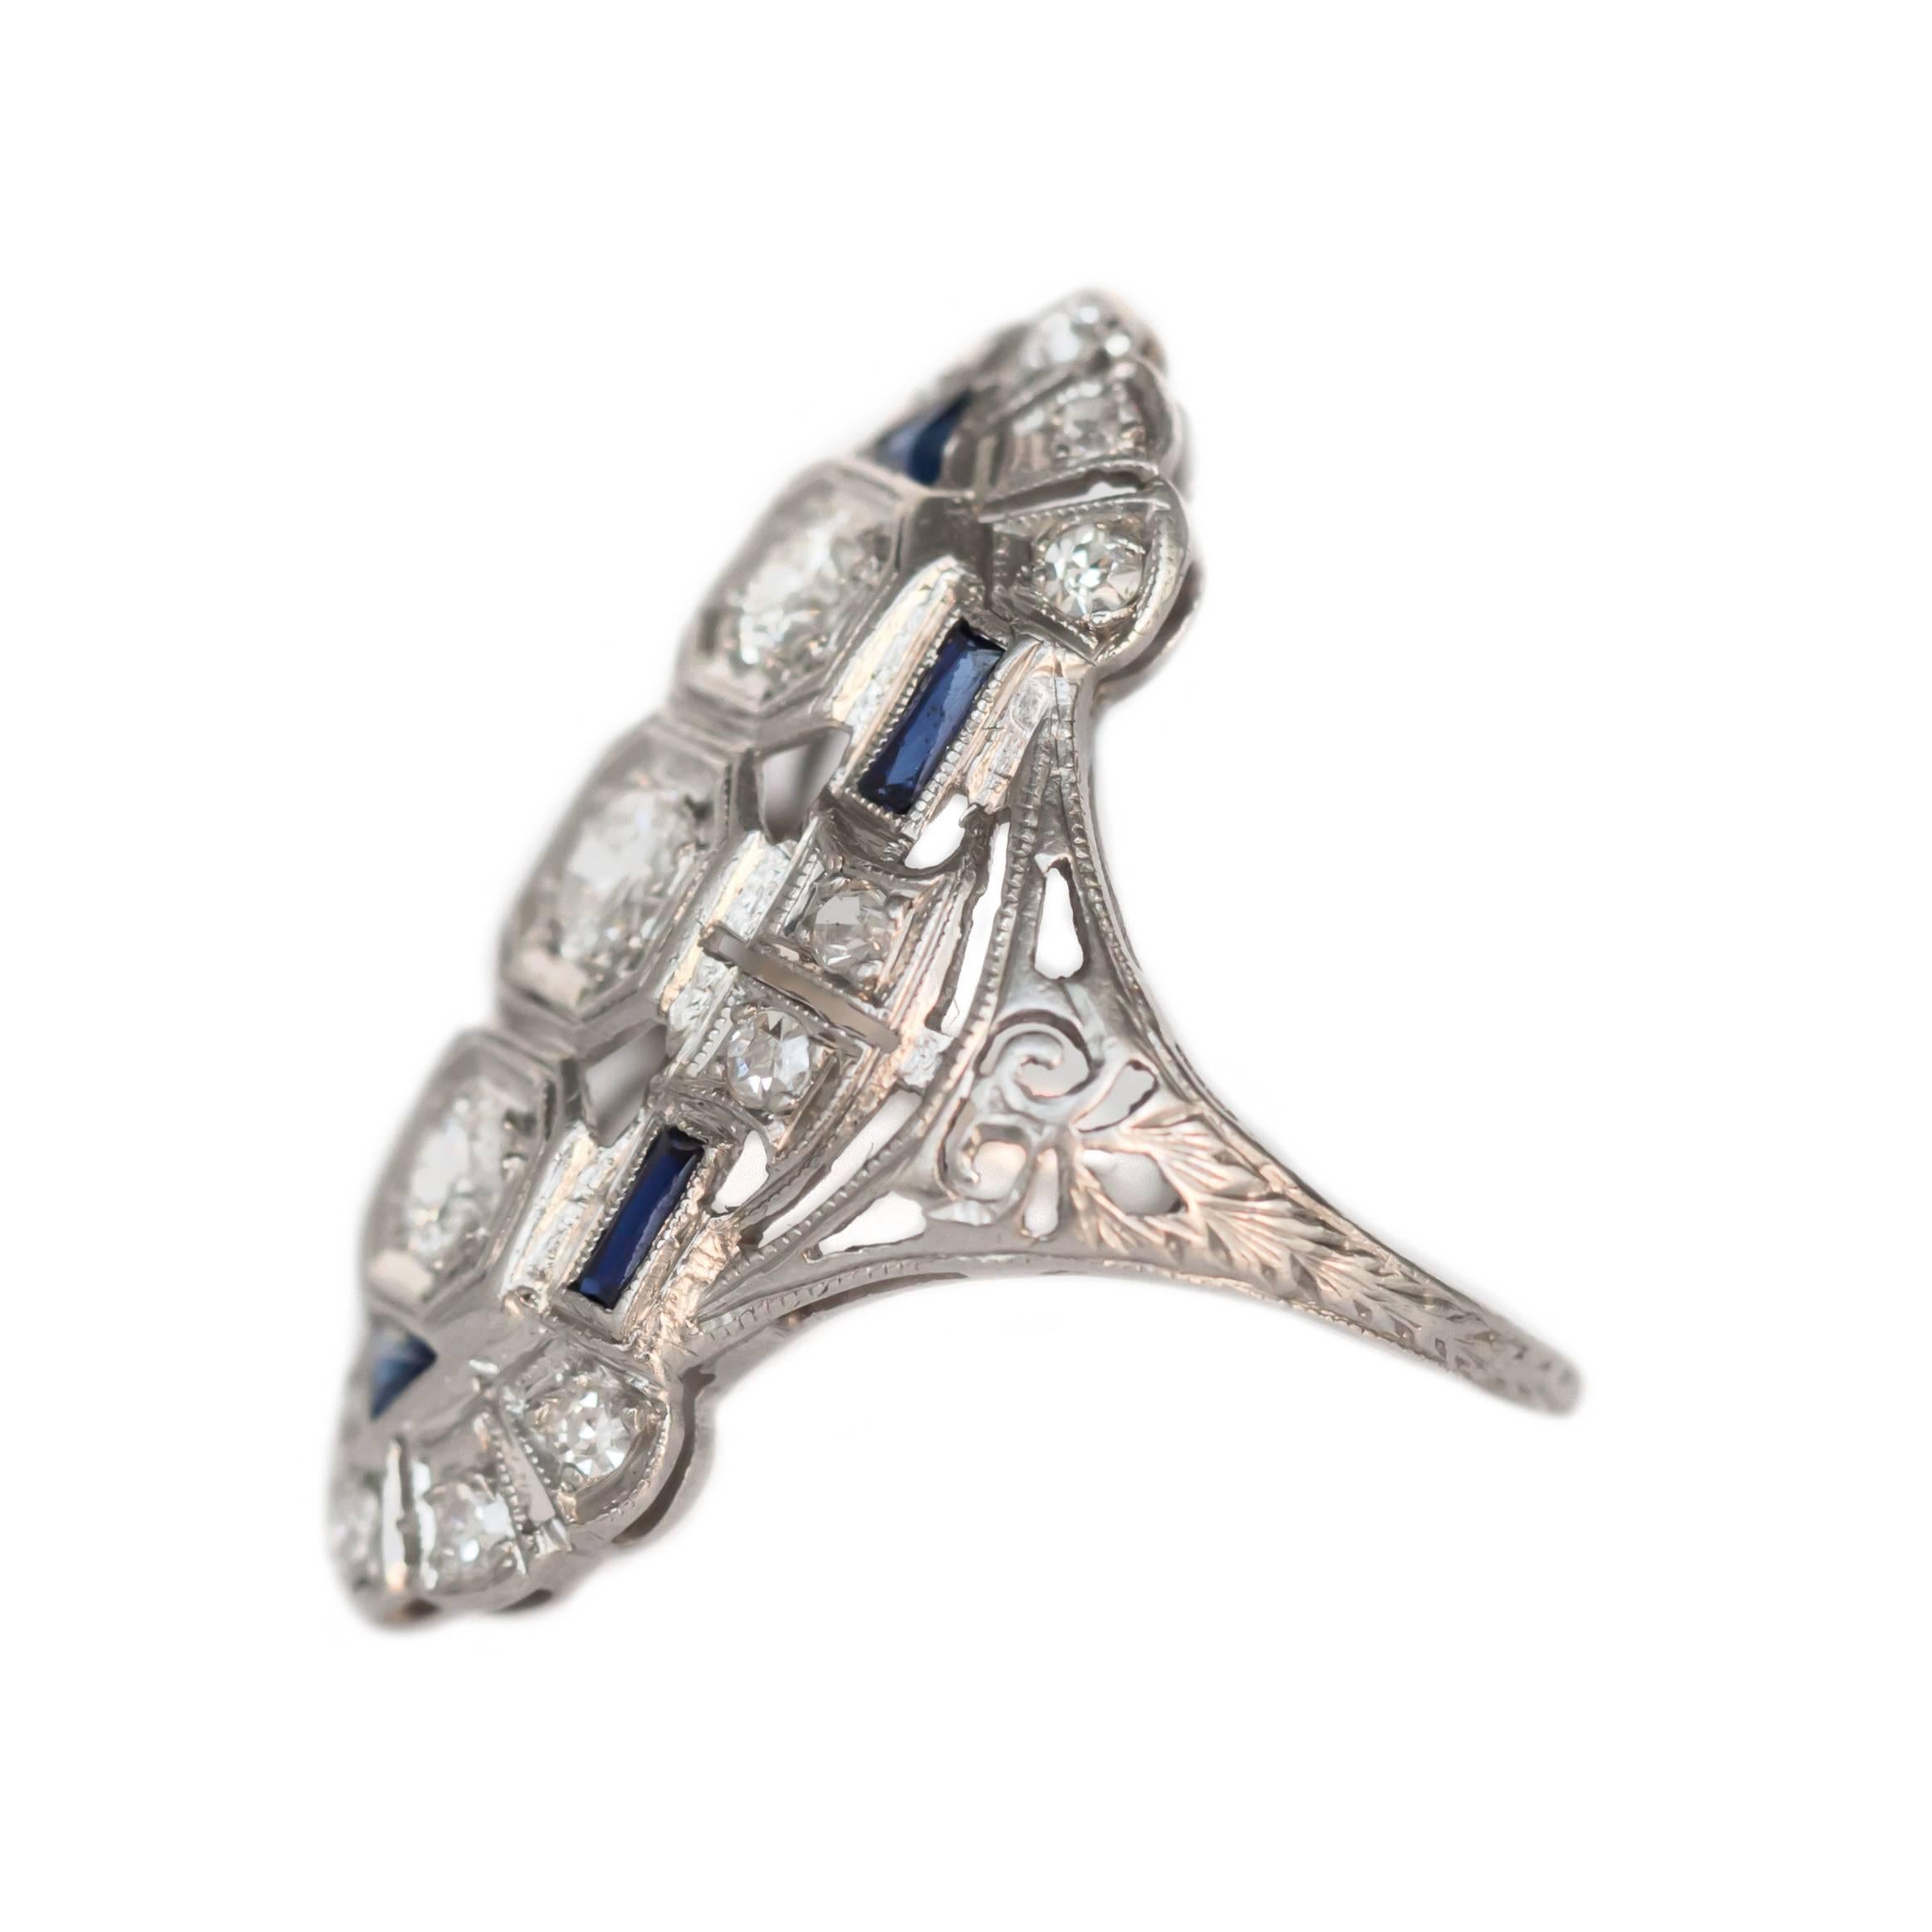 Item Details: 
Ring Size: 5
Metal Type: Platinum 
Weight: 5.2 grams

Side Stone Details: 
Shape: Old European Brilliant 
Total Carat Weight: 1.00 carat, total weight
Color: F-G
Clarity: SI1

Color Stone Details: 
Type: Sapphires
Shape: French Cut